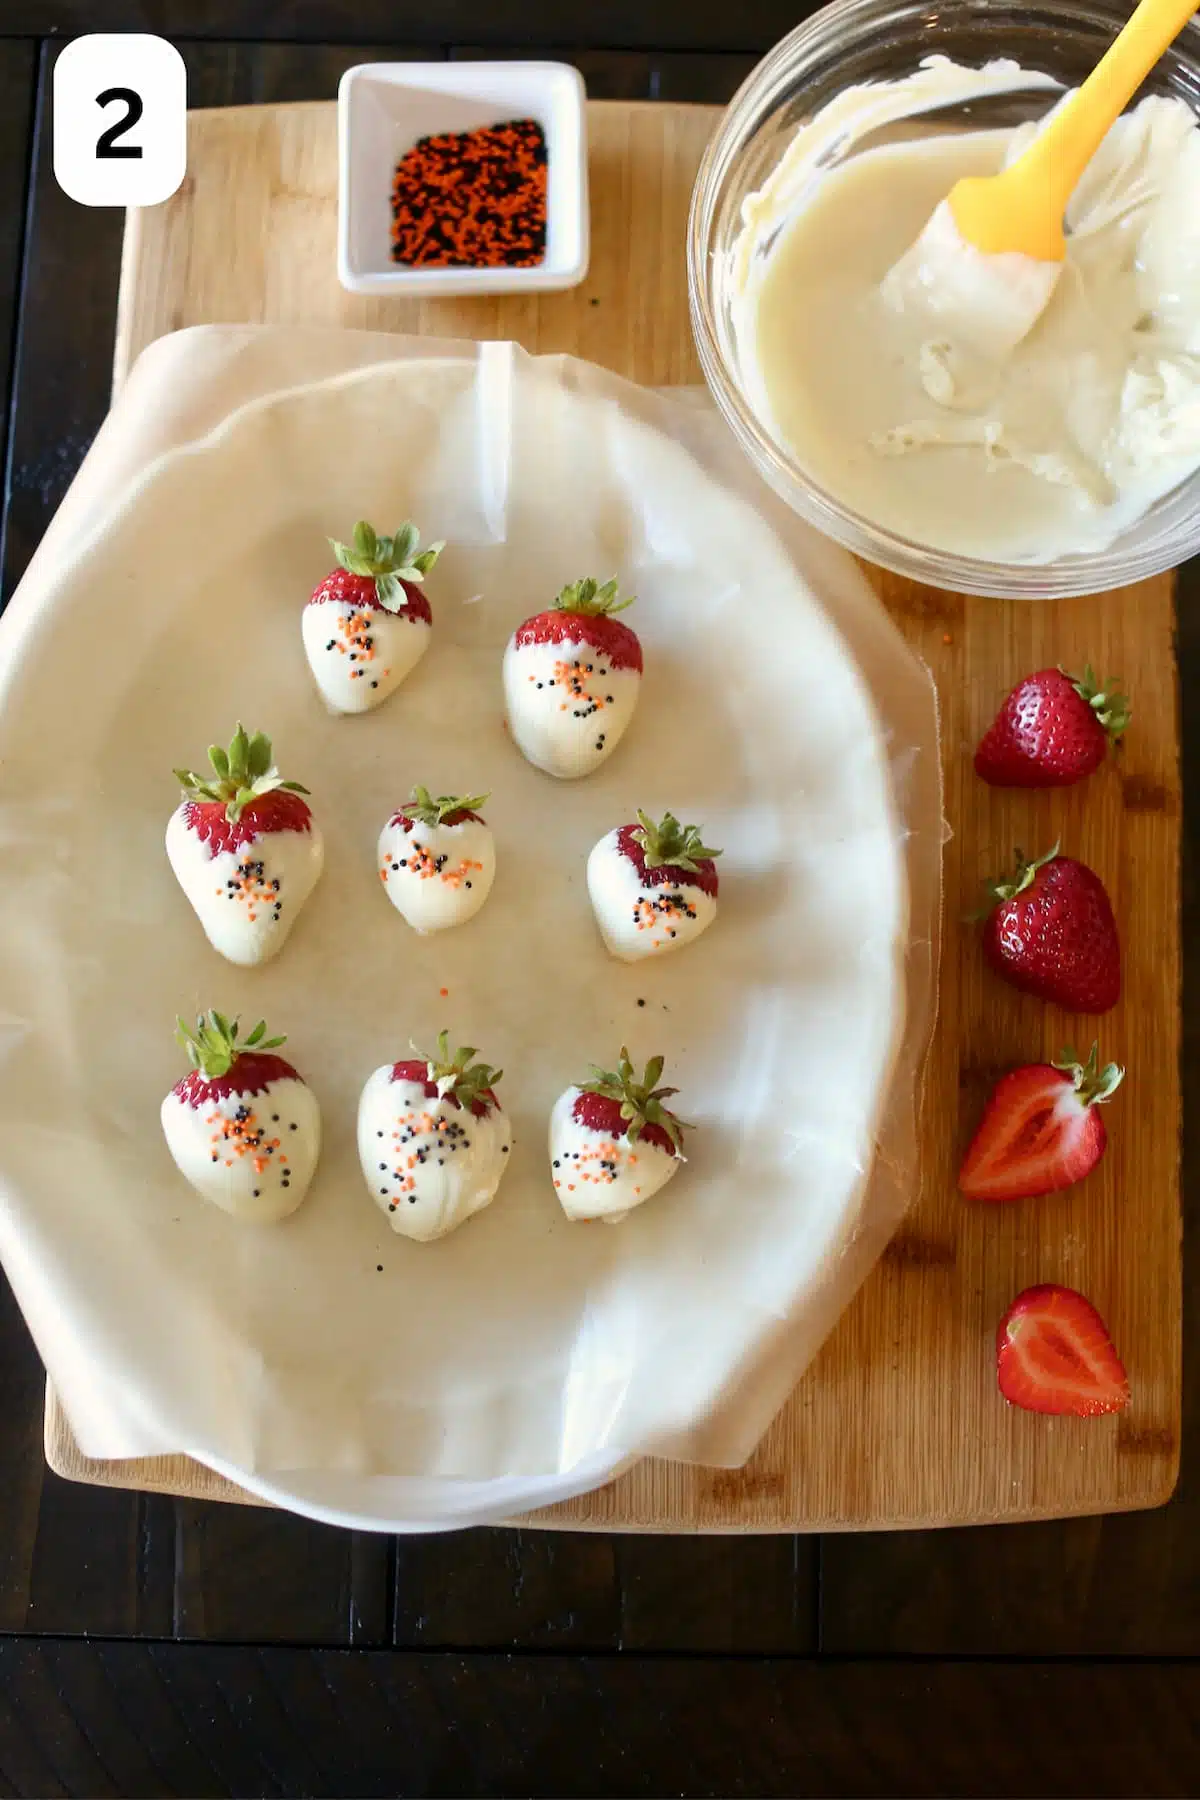 strawberries dipped in white chocolate are displayed on a platter.